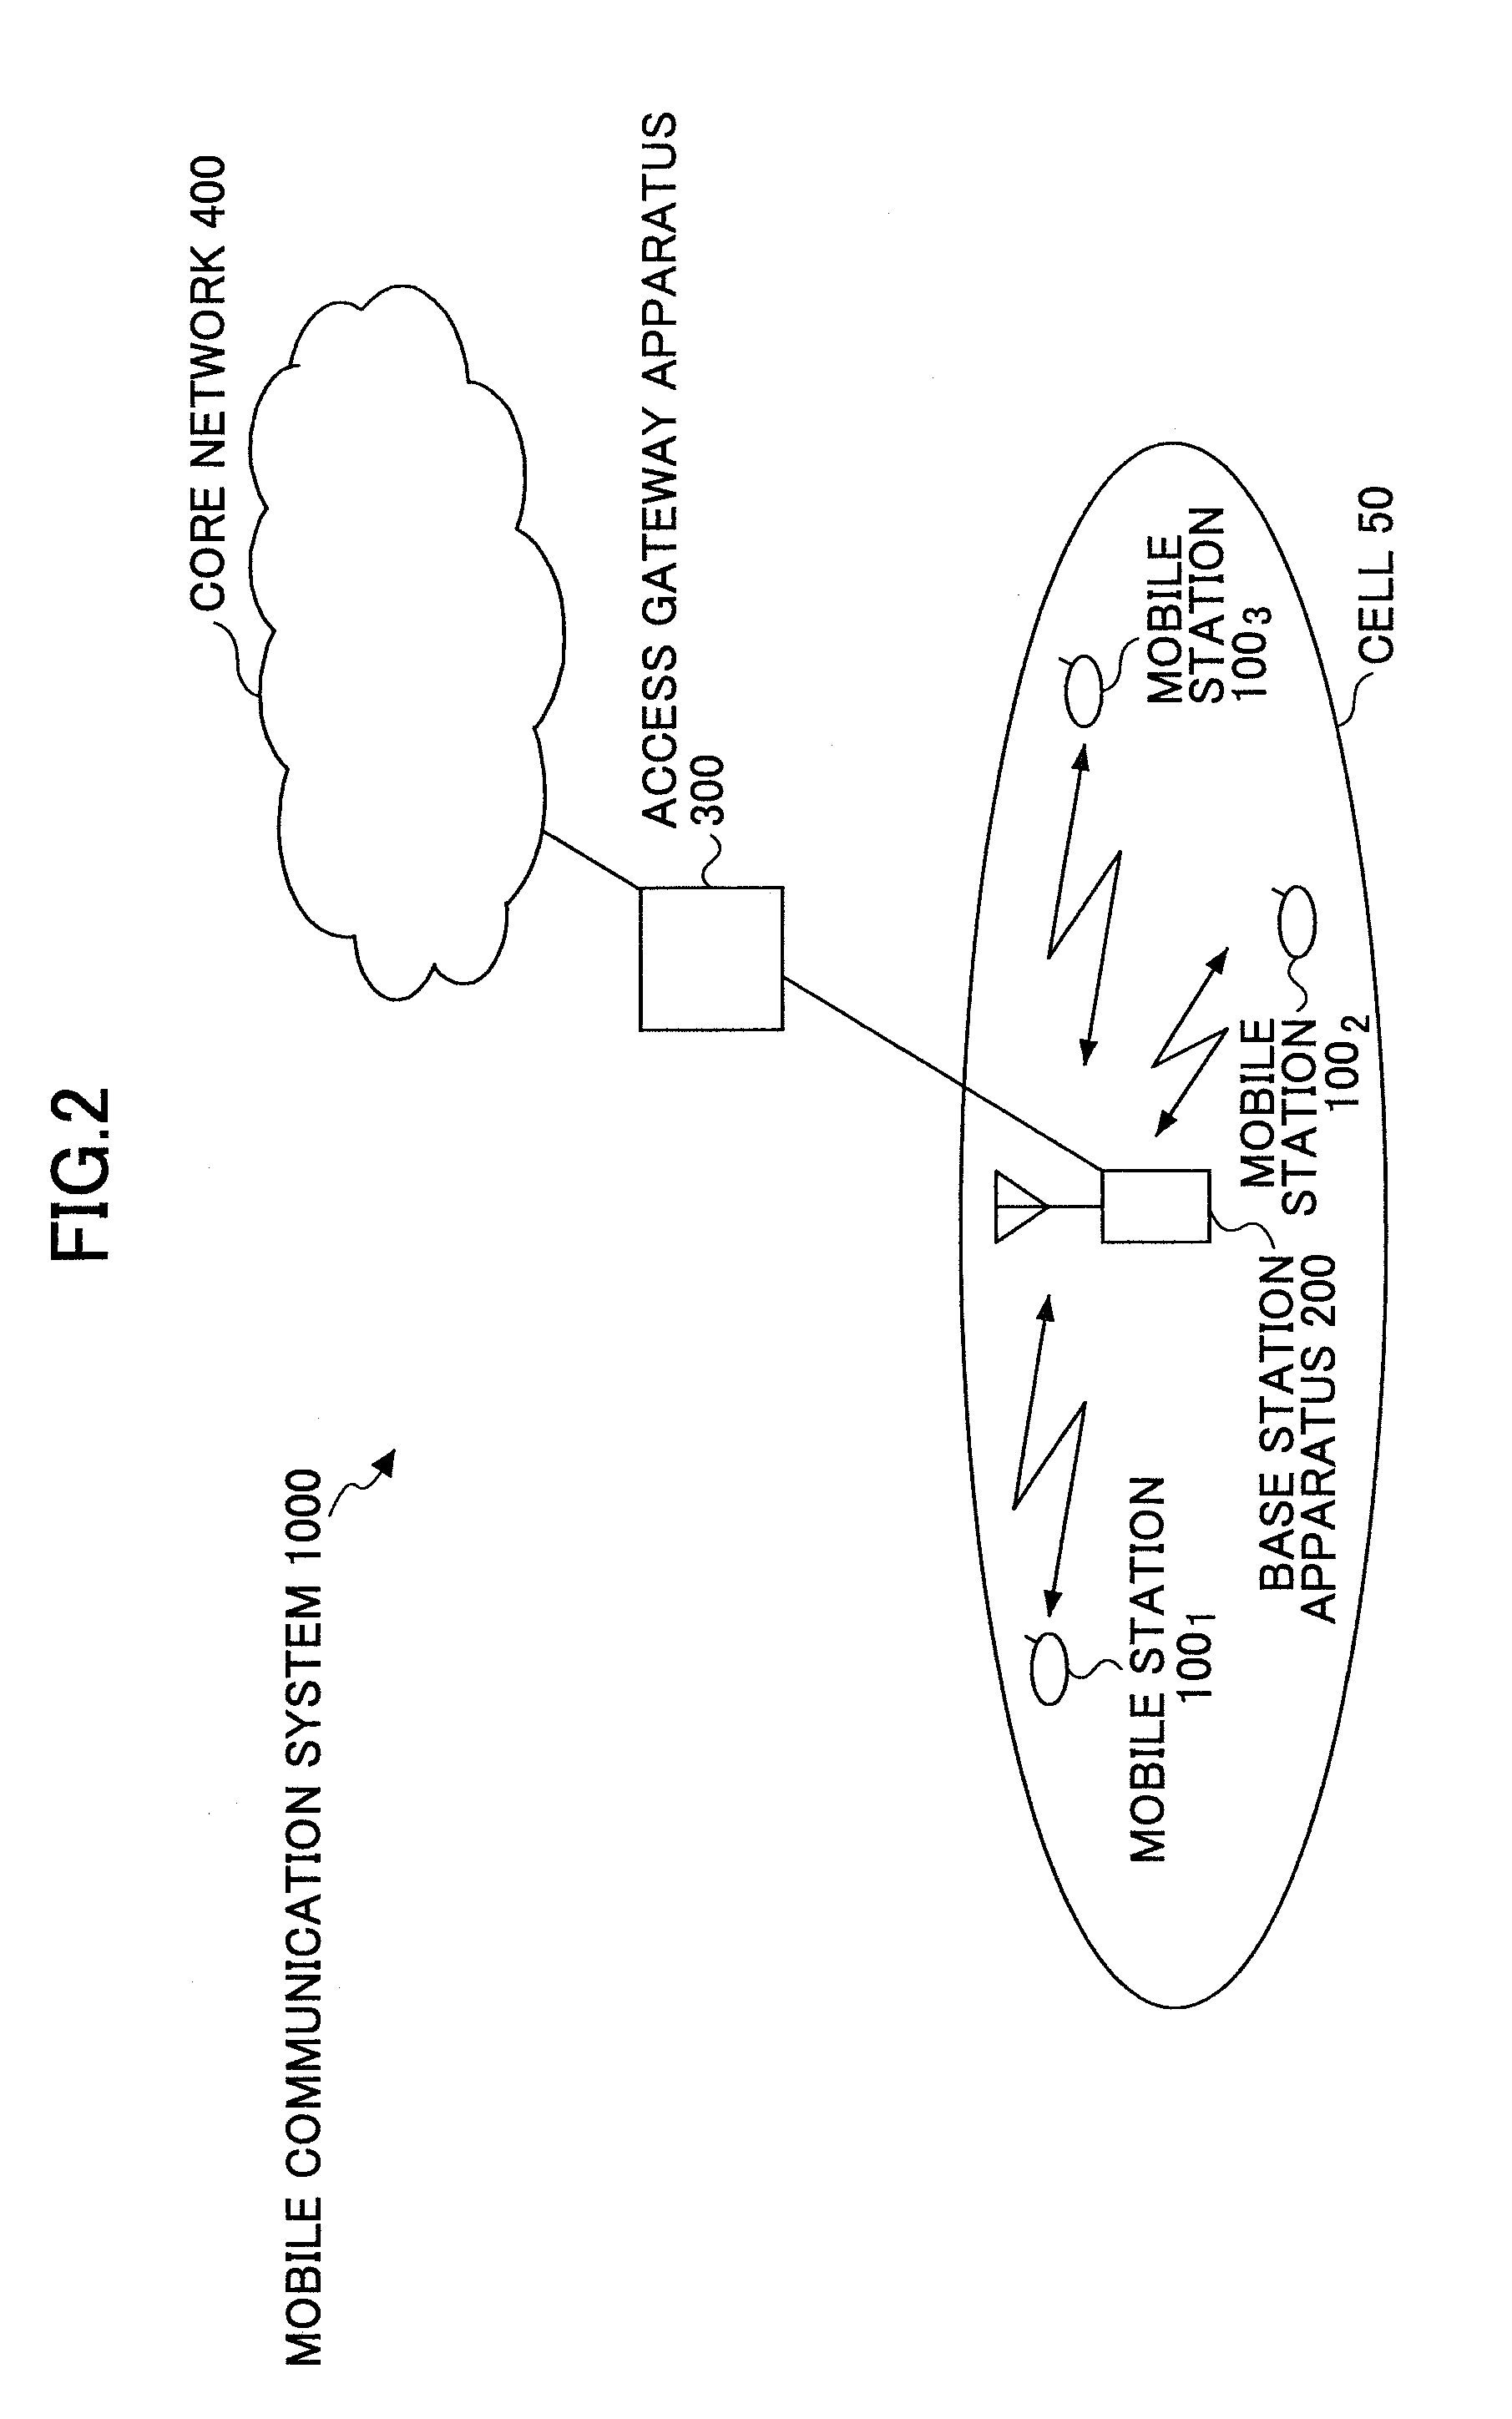 Maintaining a constant transmission power density of a data signal utilizing prohibited subcarriers